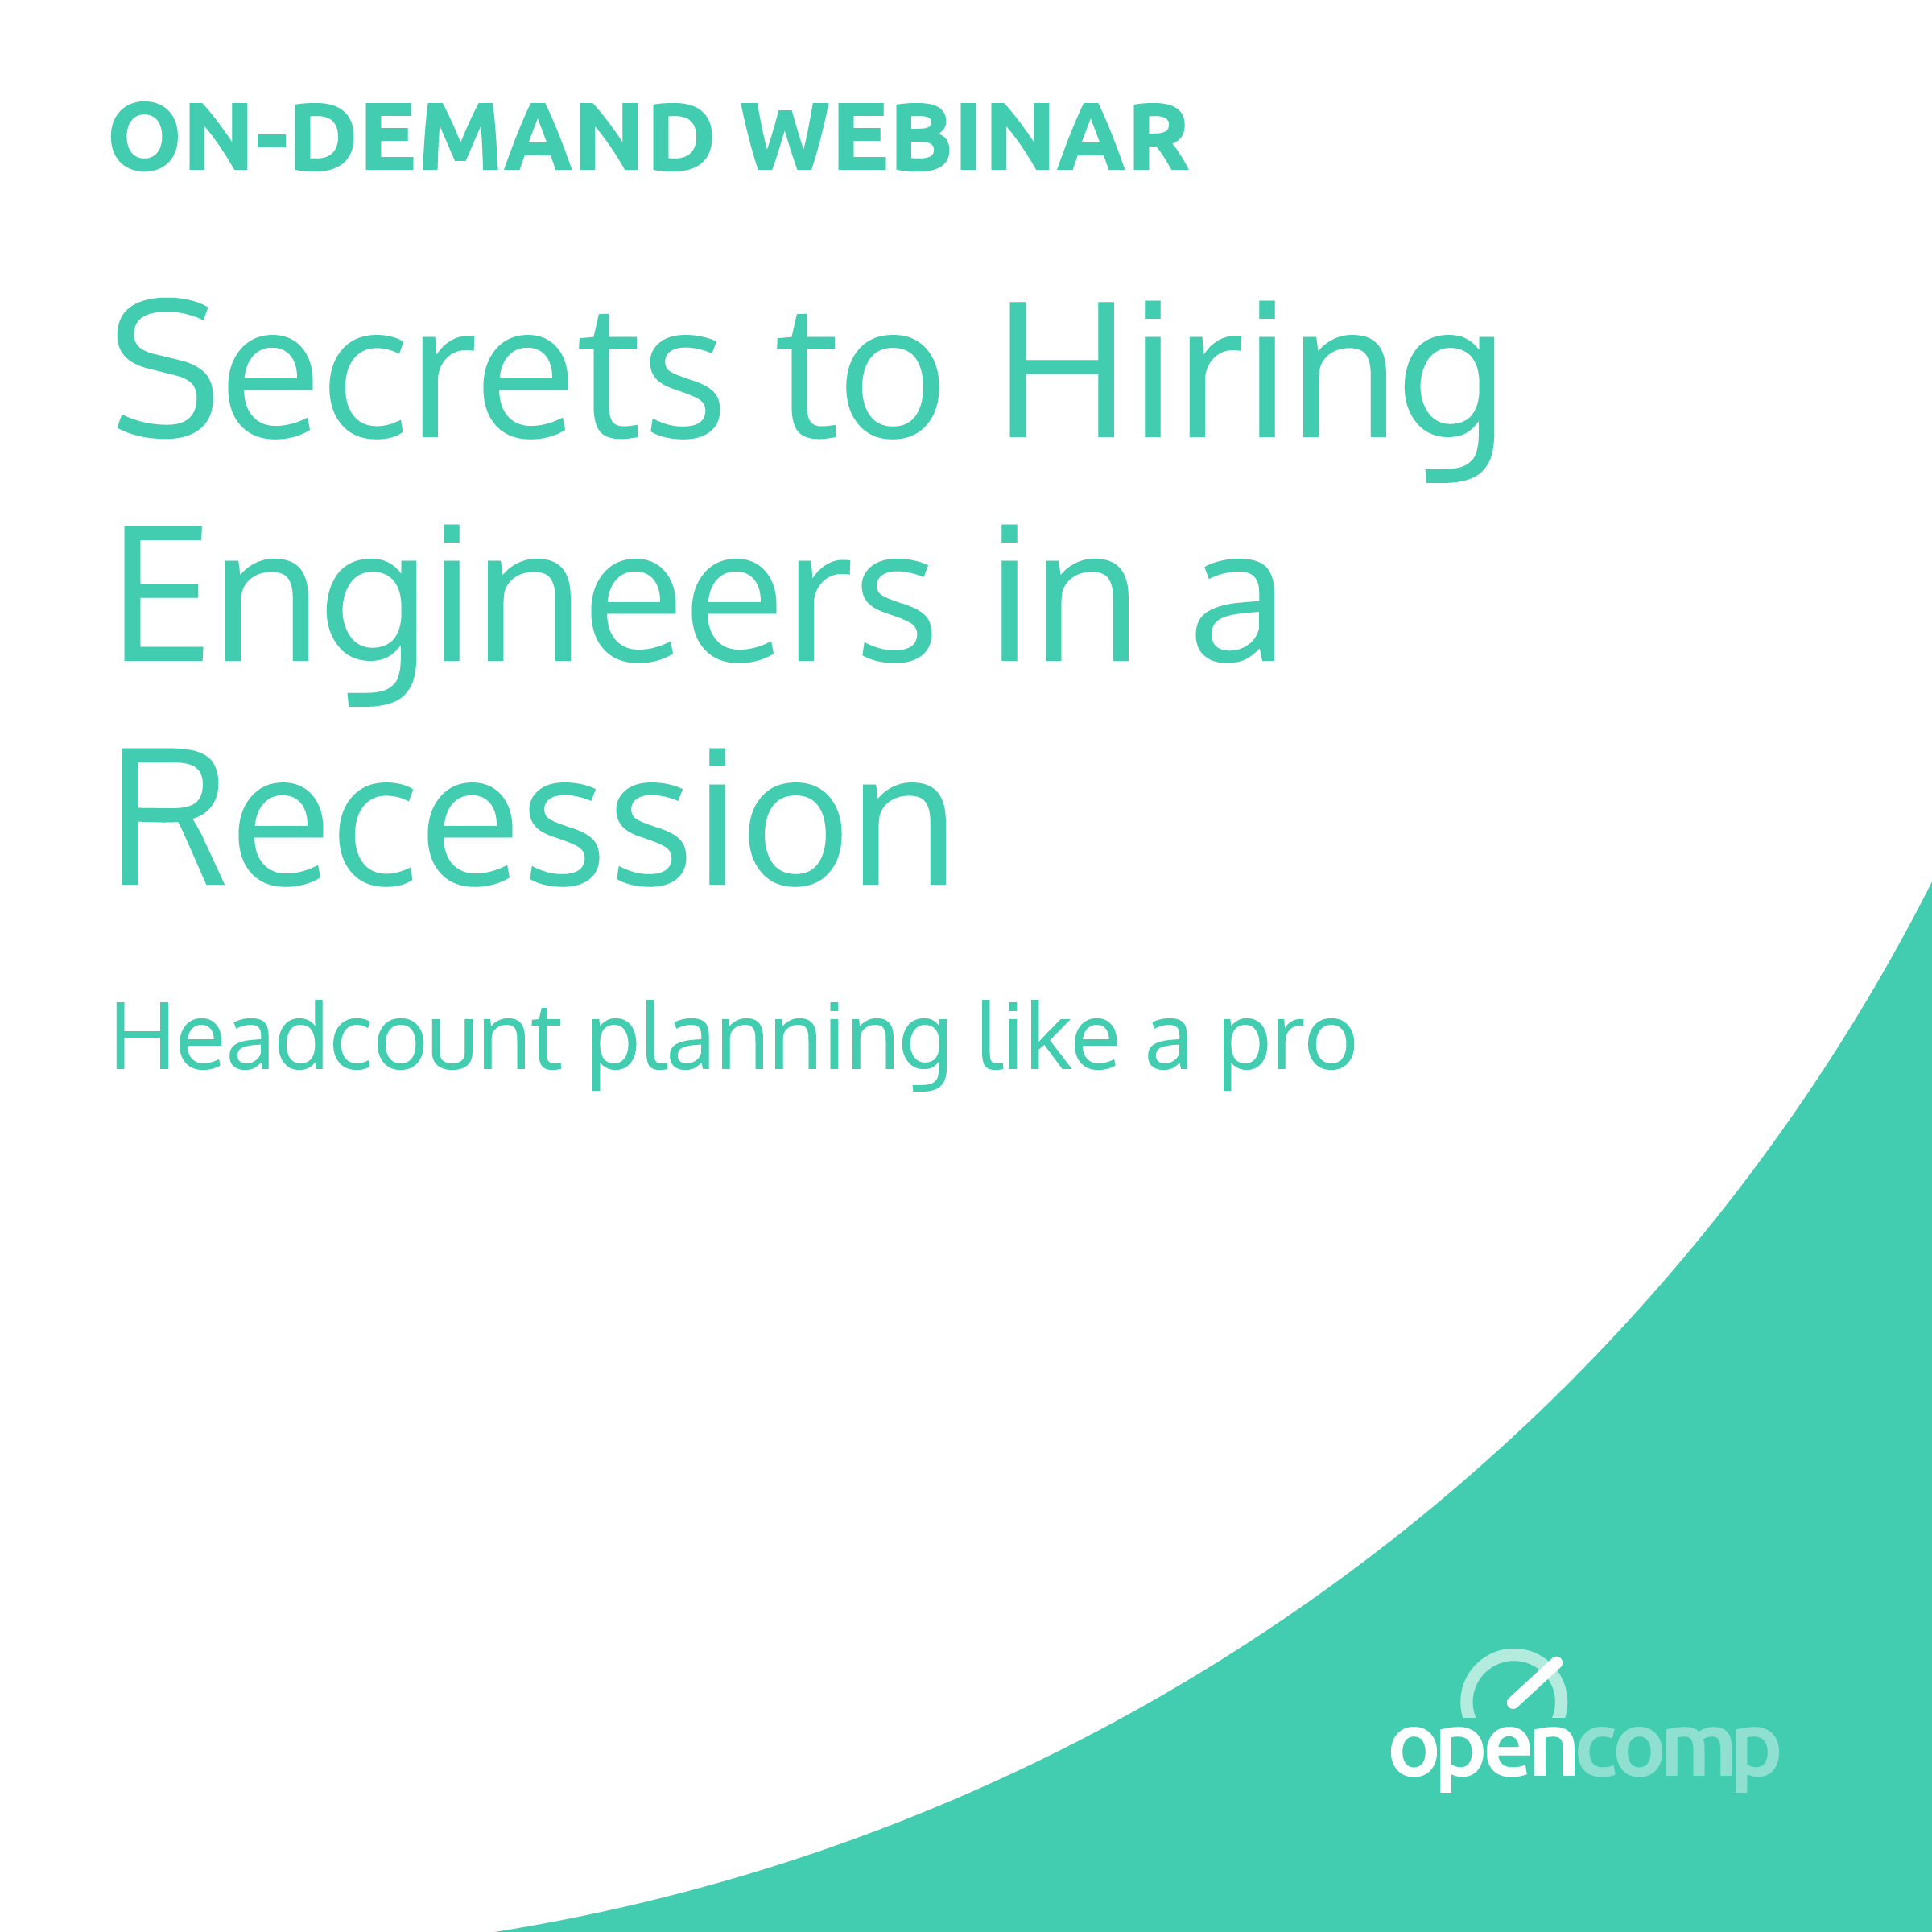 On-Demand Webinar: Secrets to Hiring Engineers in a Recession - Headcount Planning Like A Pro